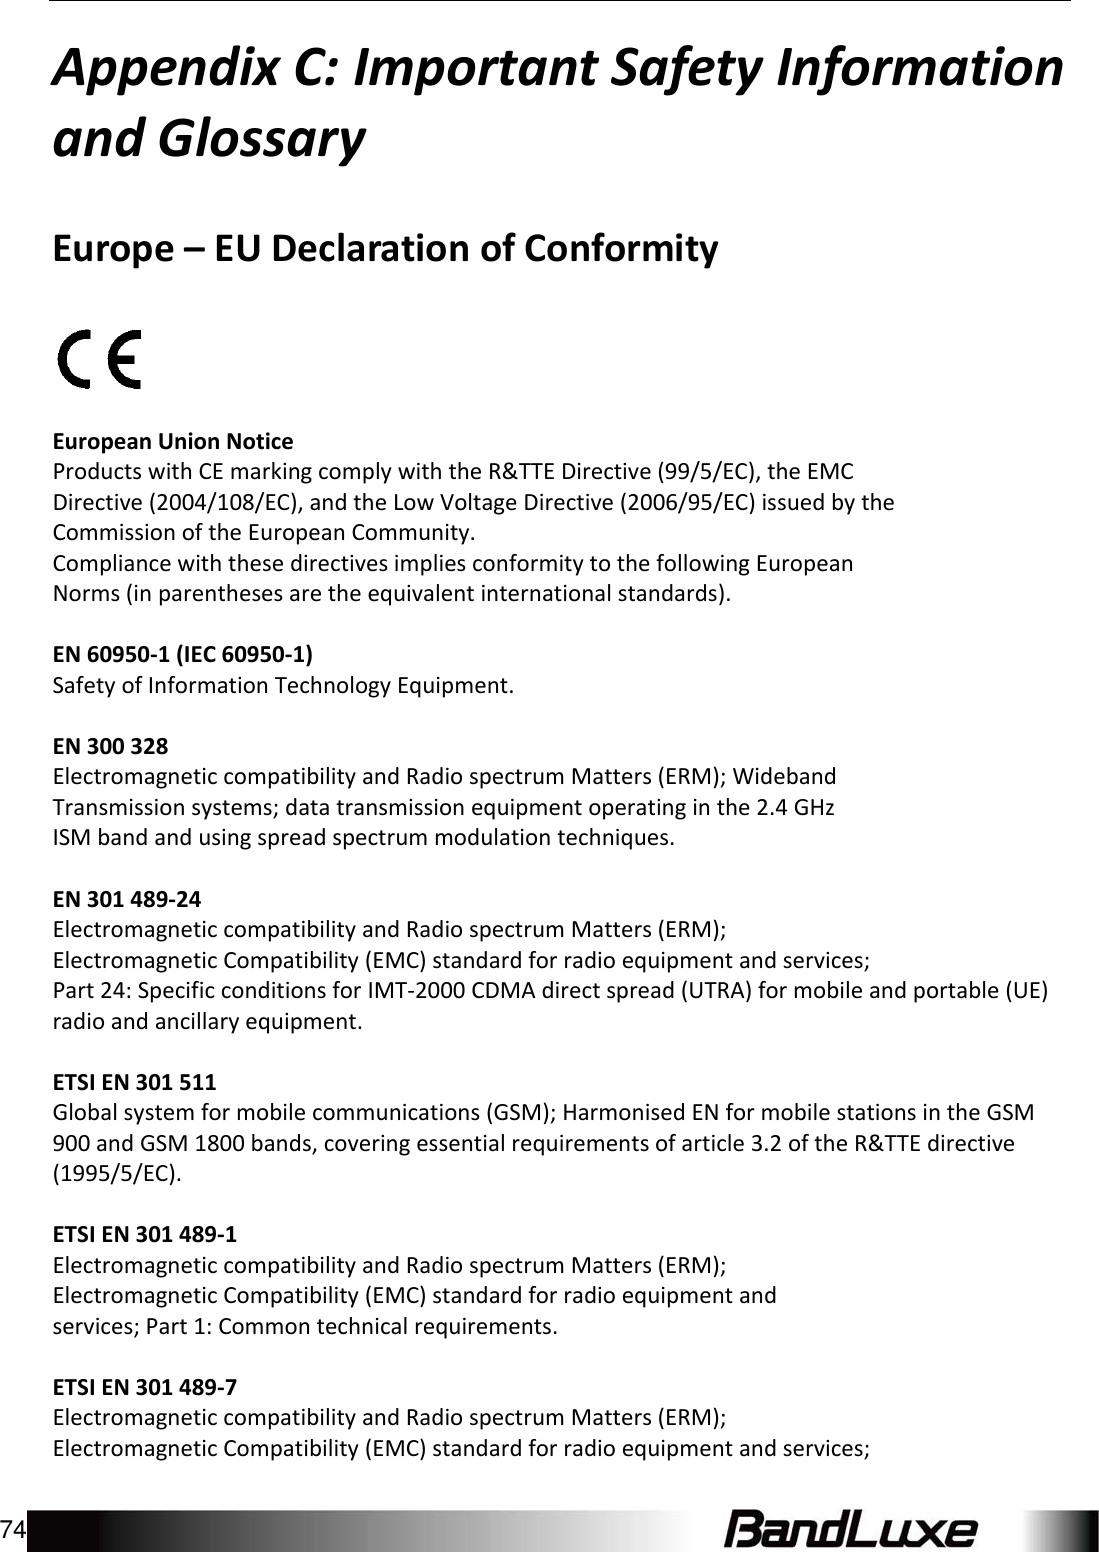 Appendix C: Important Safety Information and Glossary 74   AppendixC:ImportantSafetyInformationandGlossaryEurope–EUDeclarationofConformityEuropeanUnionNoticeProductswithCEmarkingcomplywiththeR&amp;TTEDirective(99/5/EC),theEMCDirective(2004/108/EC),andtheLowVoltageDirective(2006/95/EC)issuedbytheCommissionoftheEuropeanCommunity.CompliancewiththesedirectivesimpliesconformitytothefollowingEuropeanNorms(inparenthesesaretheequivalentinternationalstandards).EN60950‐1(IEC60950‐1)SafetyofInformationTechnologyEquipment.EN300328ElectromagneticcompatibilityandRadiospectrumMatters(ERM);WidebandTransmissionsystems;datatransmissionequipmentoperatinginthe2.4GHzISMbandandusingspreadspectrummodulationtechniques.EN301489‐24ElectromagneticcompatibilityandRadiospectrumMatters(ERM);ElectromagneticCompatibility(EMC)standardforradioequipmentandservices;Part24:SpecificconditionsforIMT‐2000CDMAdirectspread(UTRA)formobileandportable(UE)radioandancillaryequipment.ETSIEN301511Globalsystemformobilecommunications(GSM);HarmonisedENformobilestationsintheGSM900andGSM1800bands,coveringessentialrequirementsofarticle3.2oftheR&amp;TTEdirective(1995/5/EC).ETSIEN301489‐1ElectromagneticcompatibilityandRadiospectrumMatters(ERM);ElectromagneticCompatibility(EMC)standardforradioequipmentandservices;Part1:Commontechnicalrequirements.ETSIEN301489‐7ElectromagneticcompatibilityandRadiospectrumMatters(ERM);ElectromagneticCompatibility(EMC)standardforradioequipmentandservices;